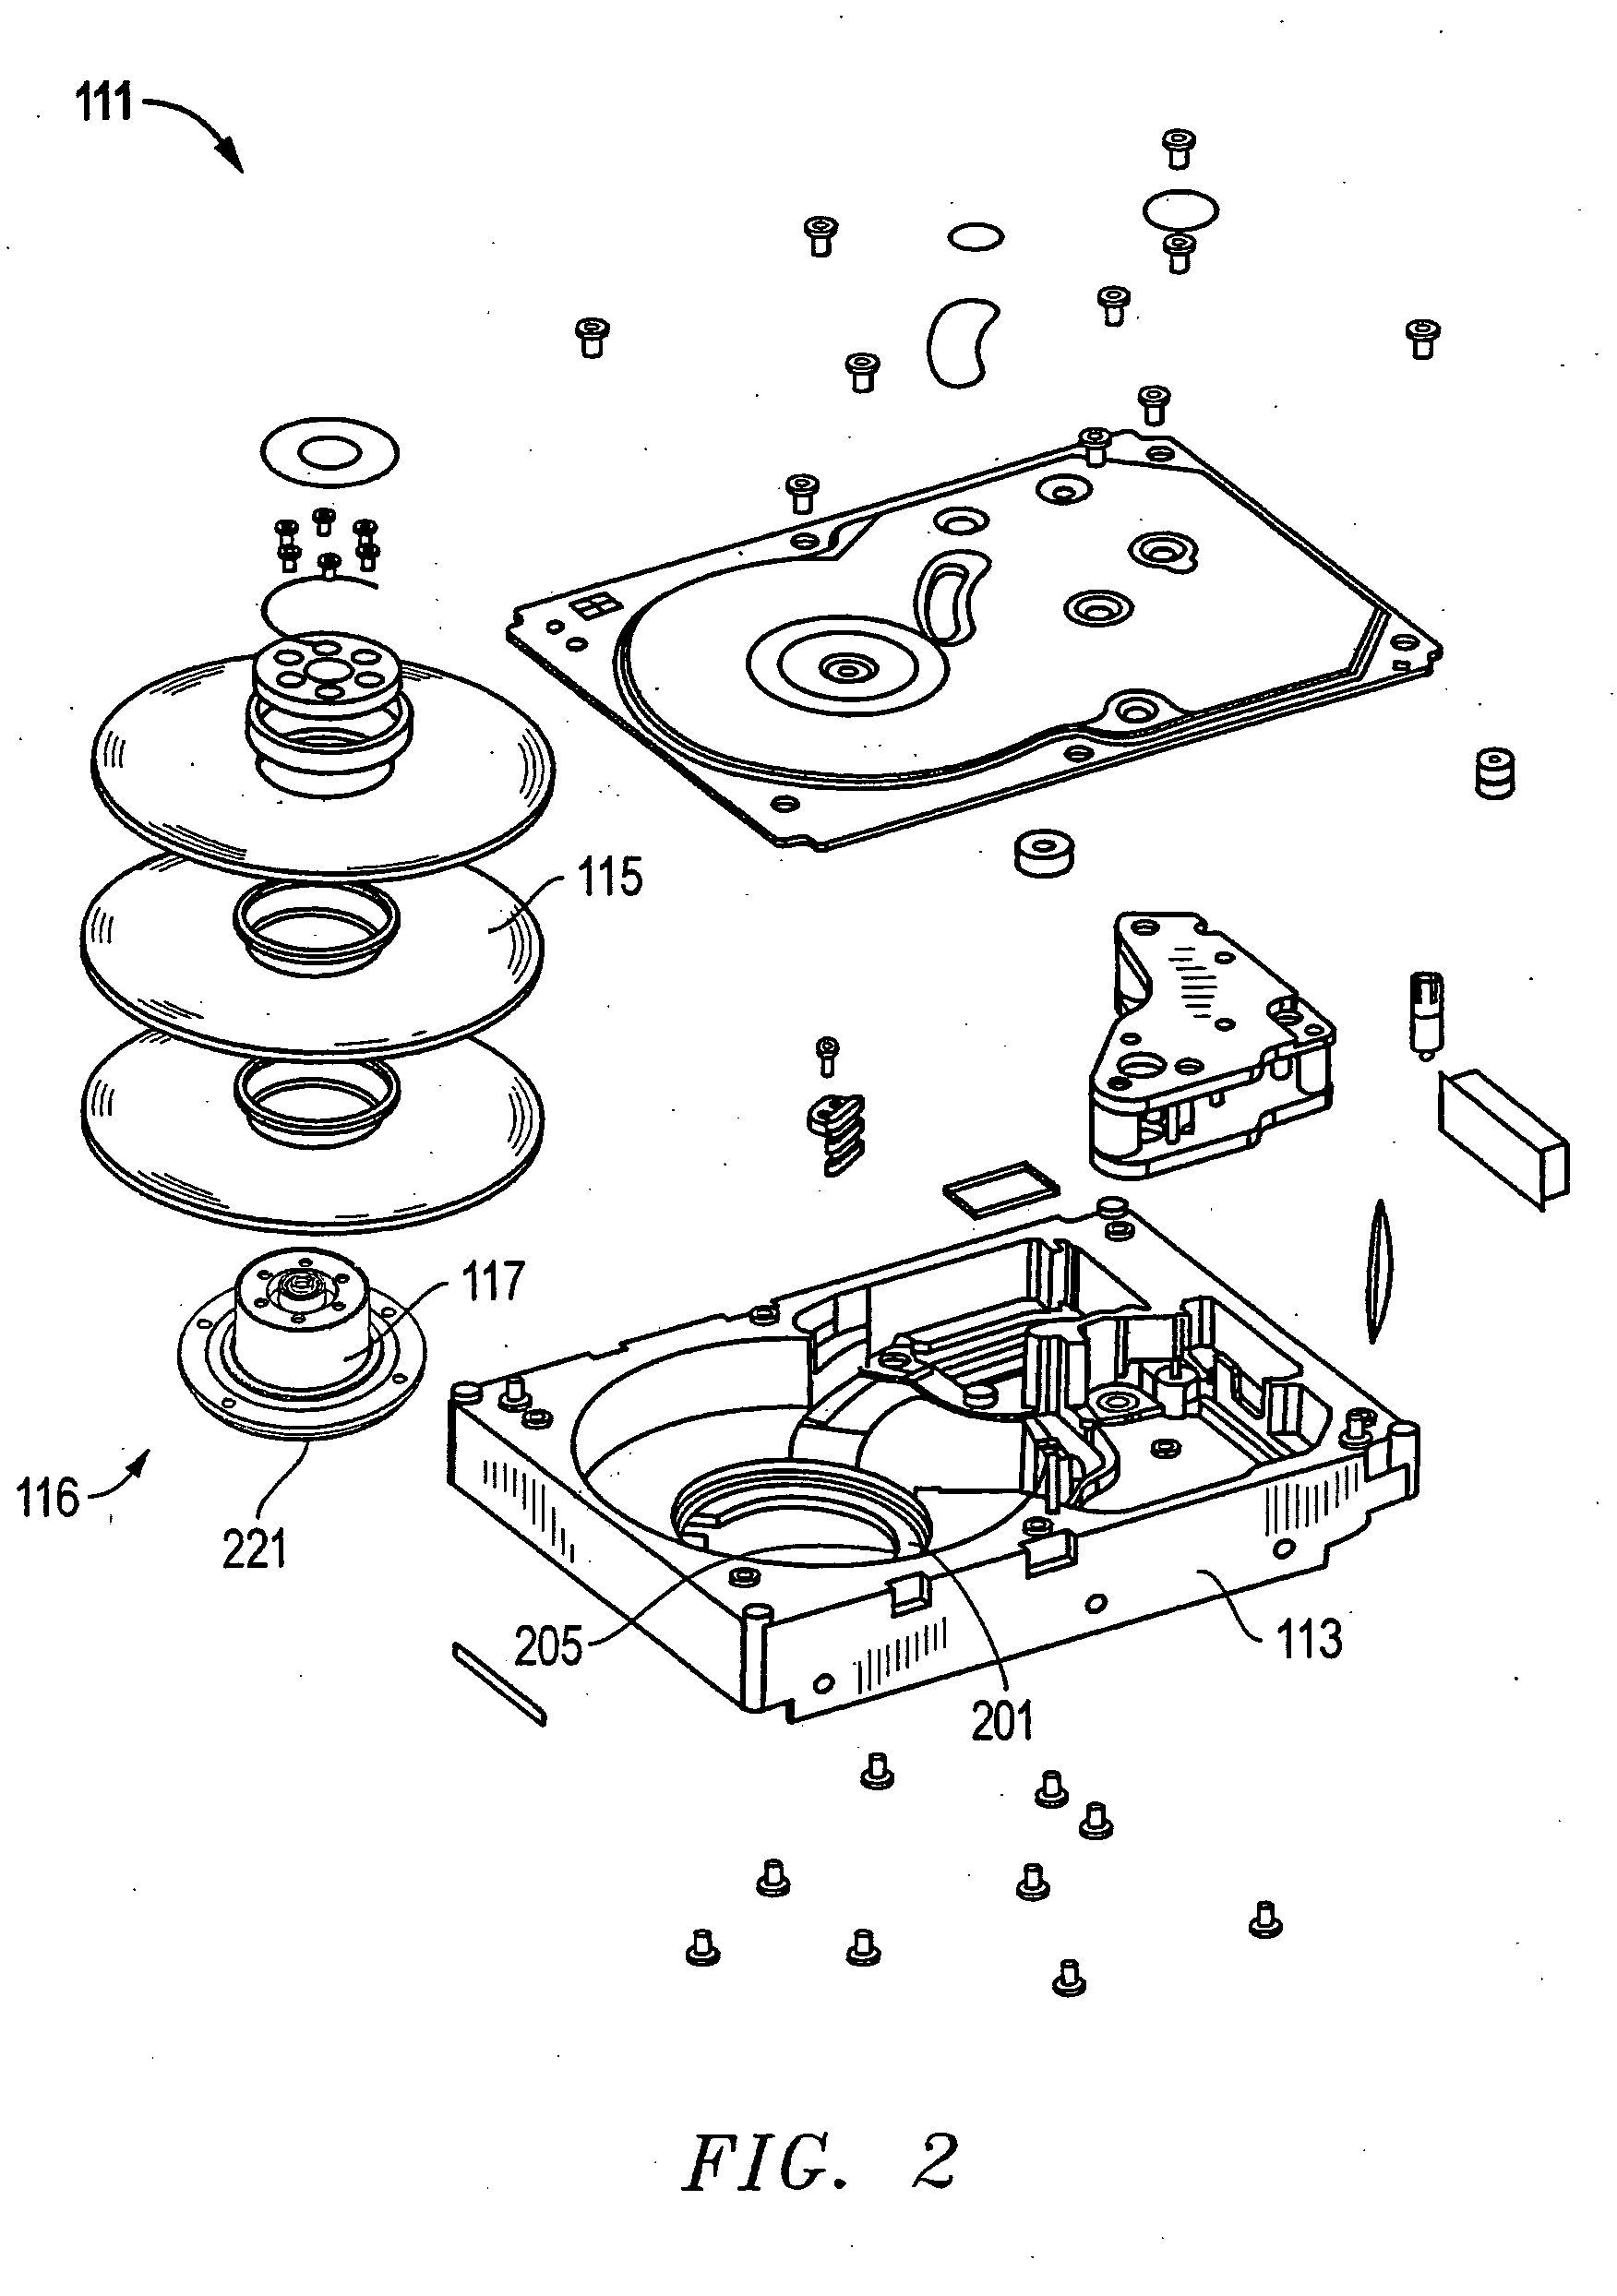 Screw attachment from exterior of disk drive enclosure for motors with mount bracket screw bolt pattern diameter larger than the motor hub outside diameter